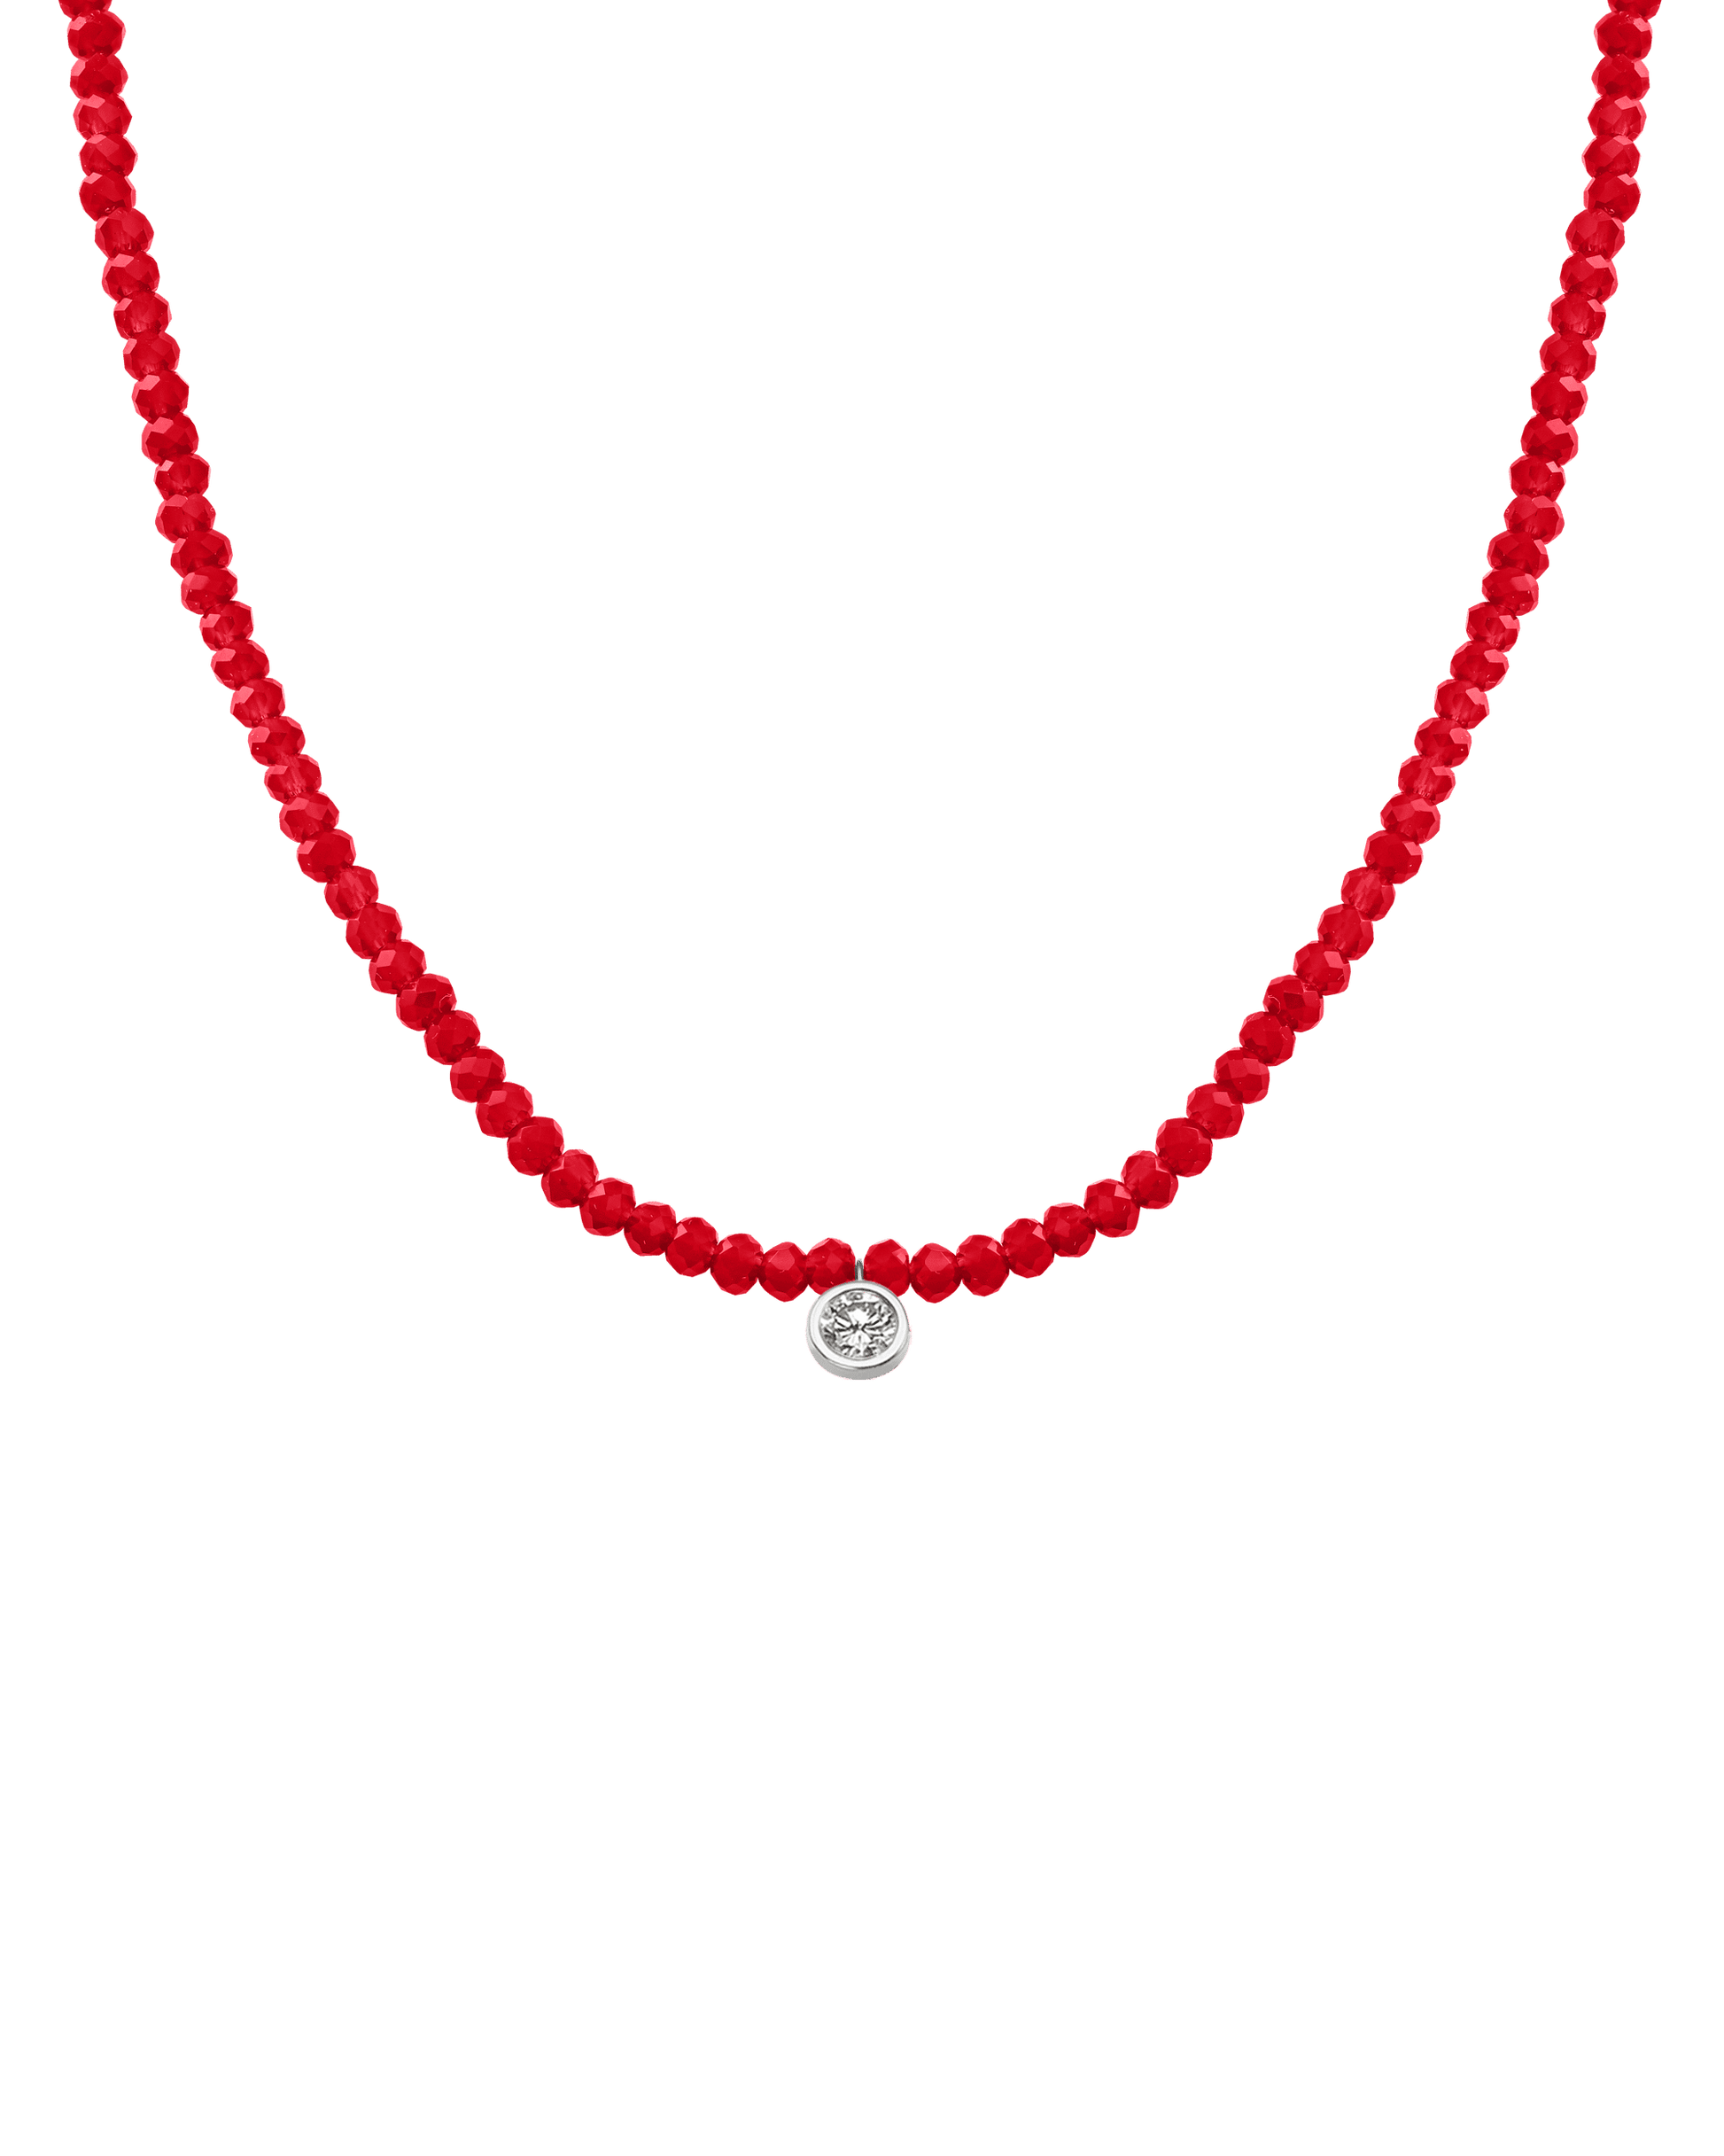 Apatite Gemstone & Diamond Necklace - 14K White Gold Necklaces 14K Solid Gold Natural Red Jade Extra Large: 0.20ct 14"